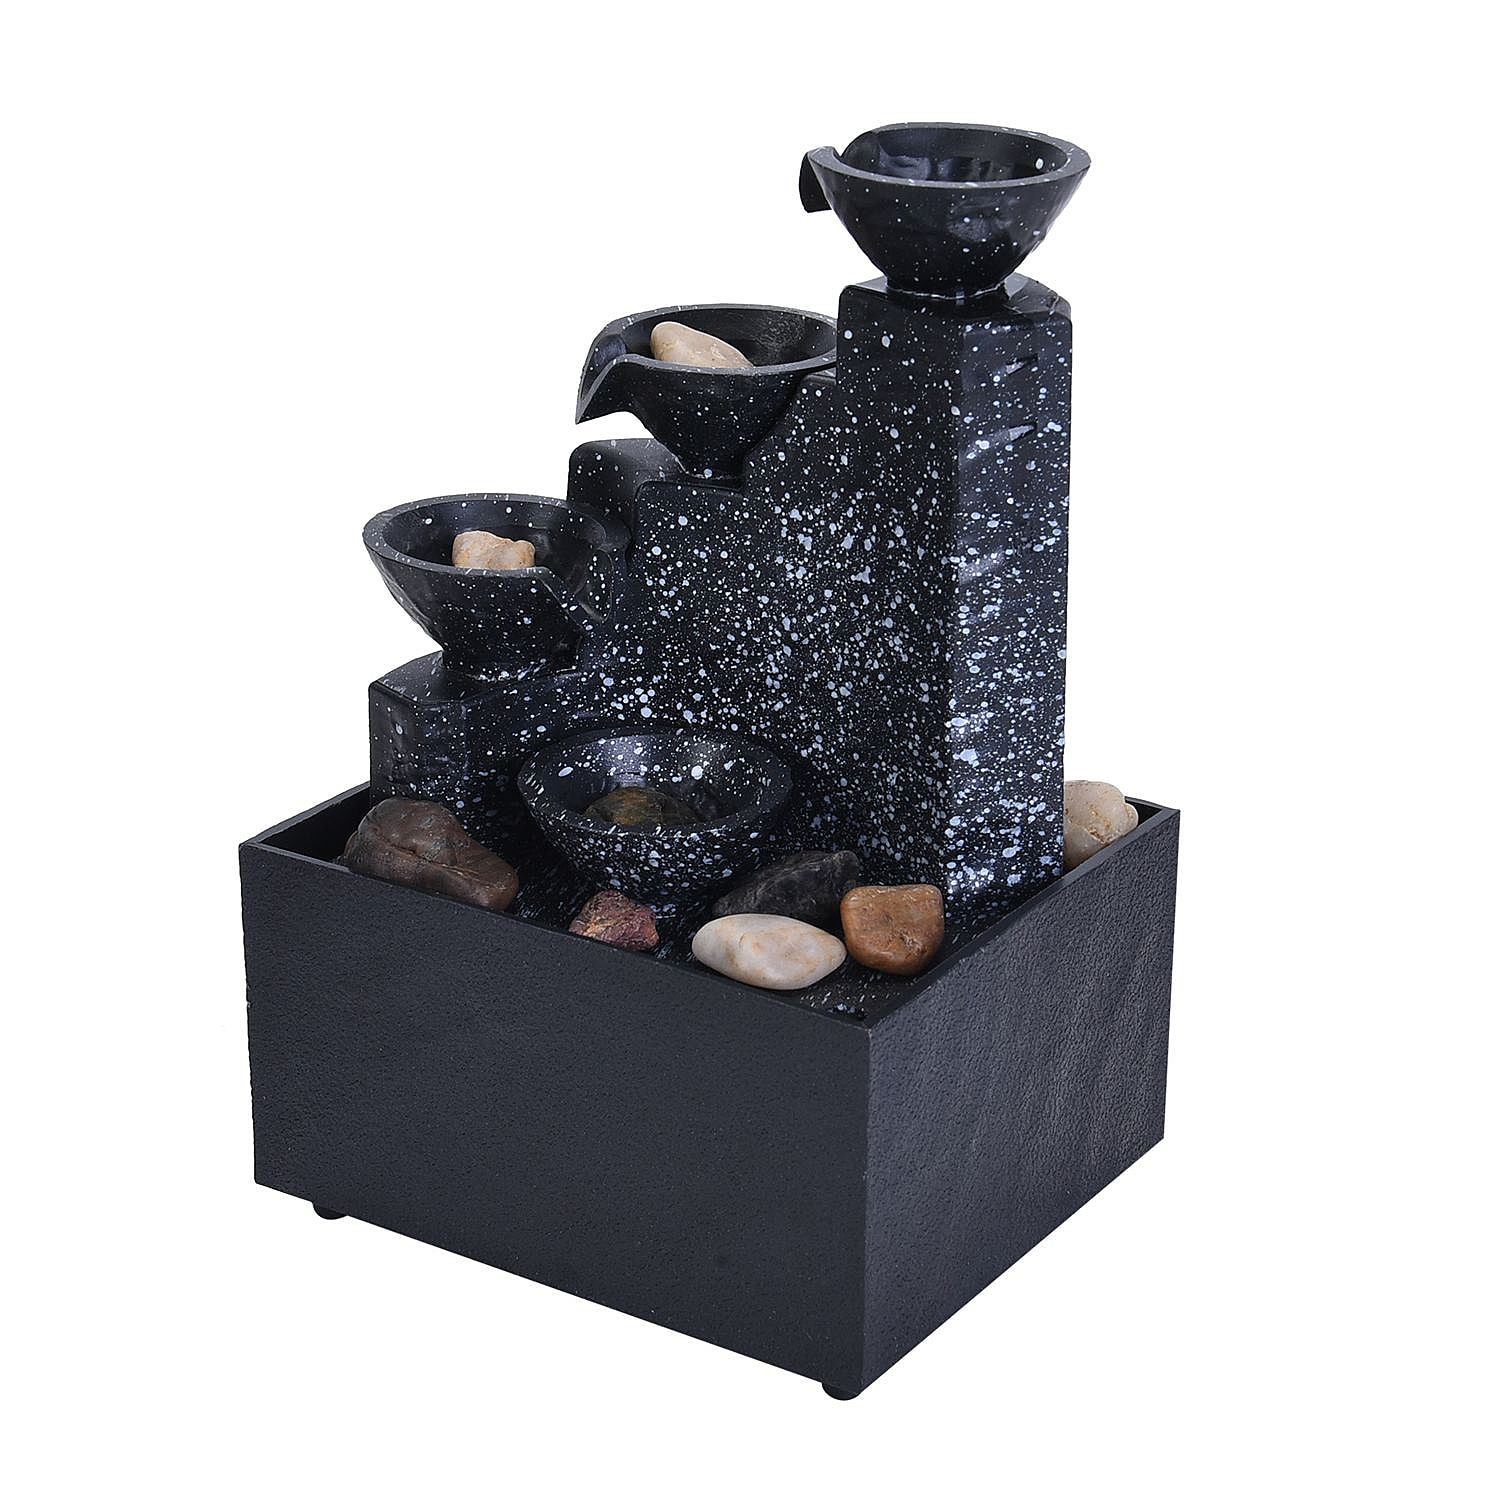 Super Find- Four Cups Mini Water Fountain with LED Light For Home Décor, Office and Living room